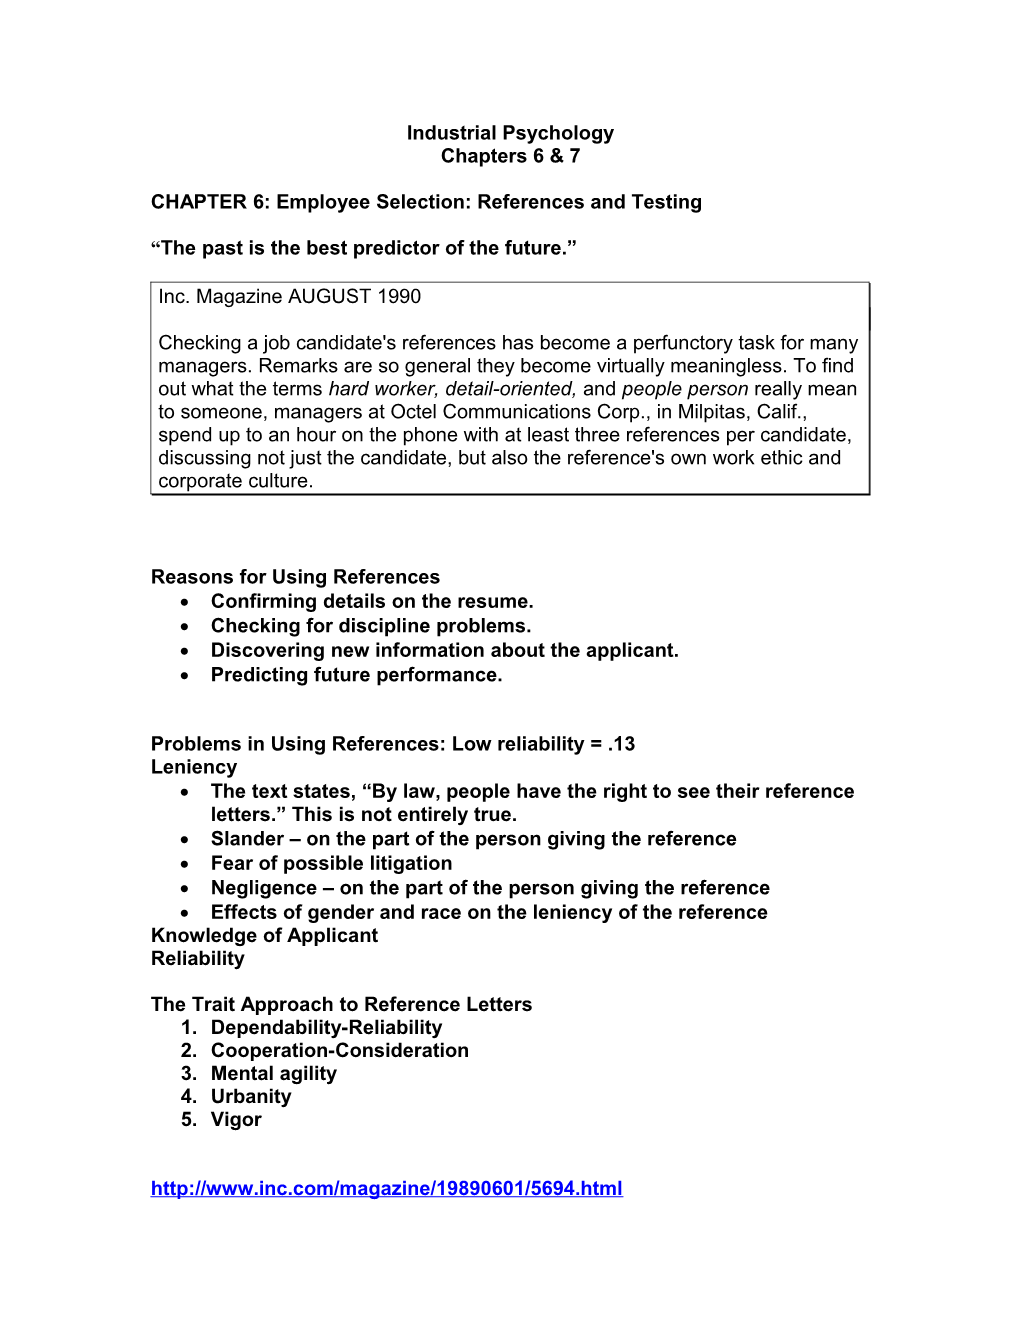 CHAPTER 6: Employee Selection: References and Testing